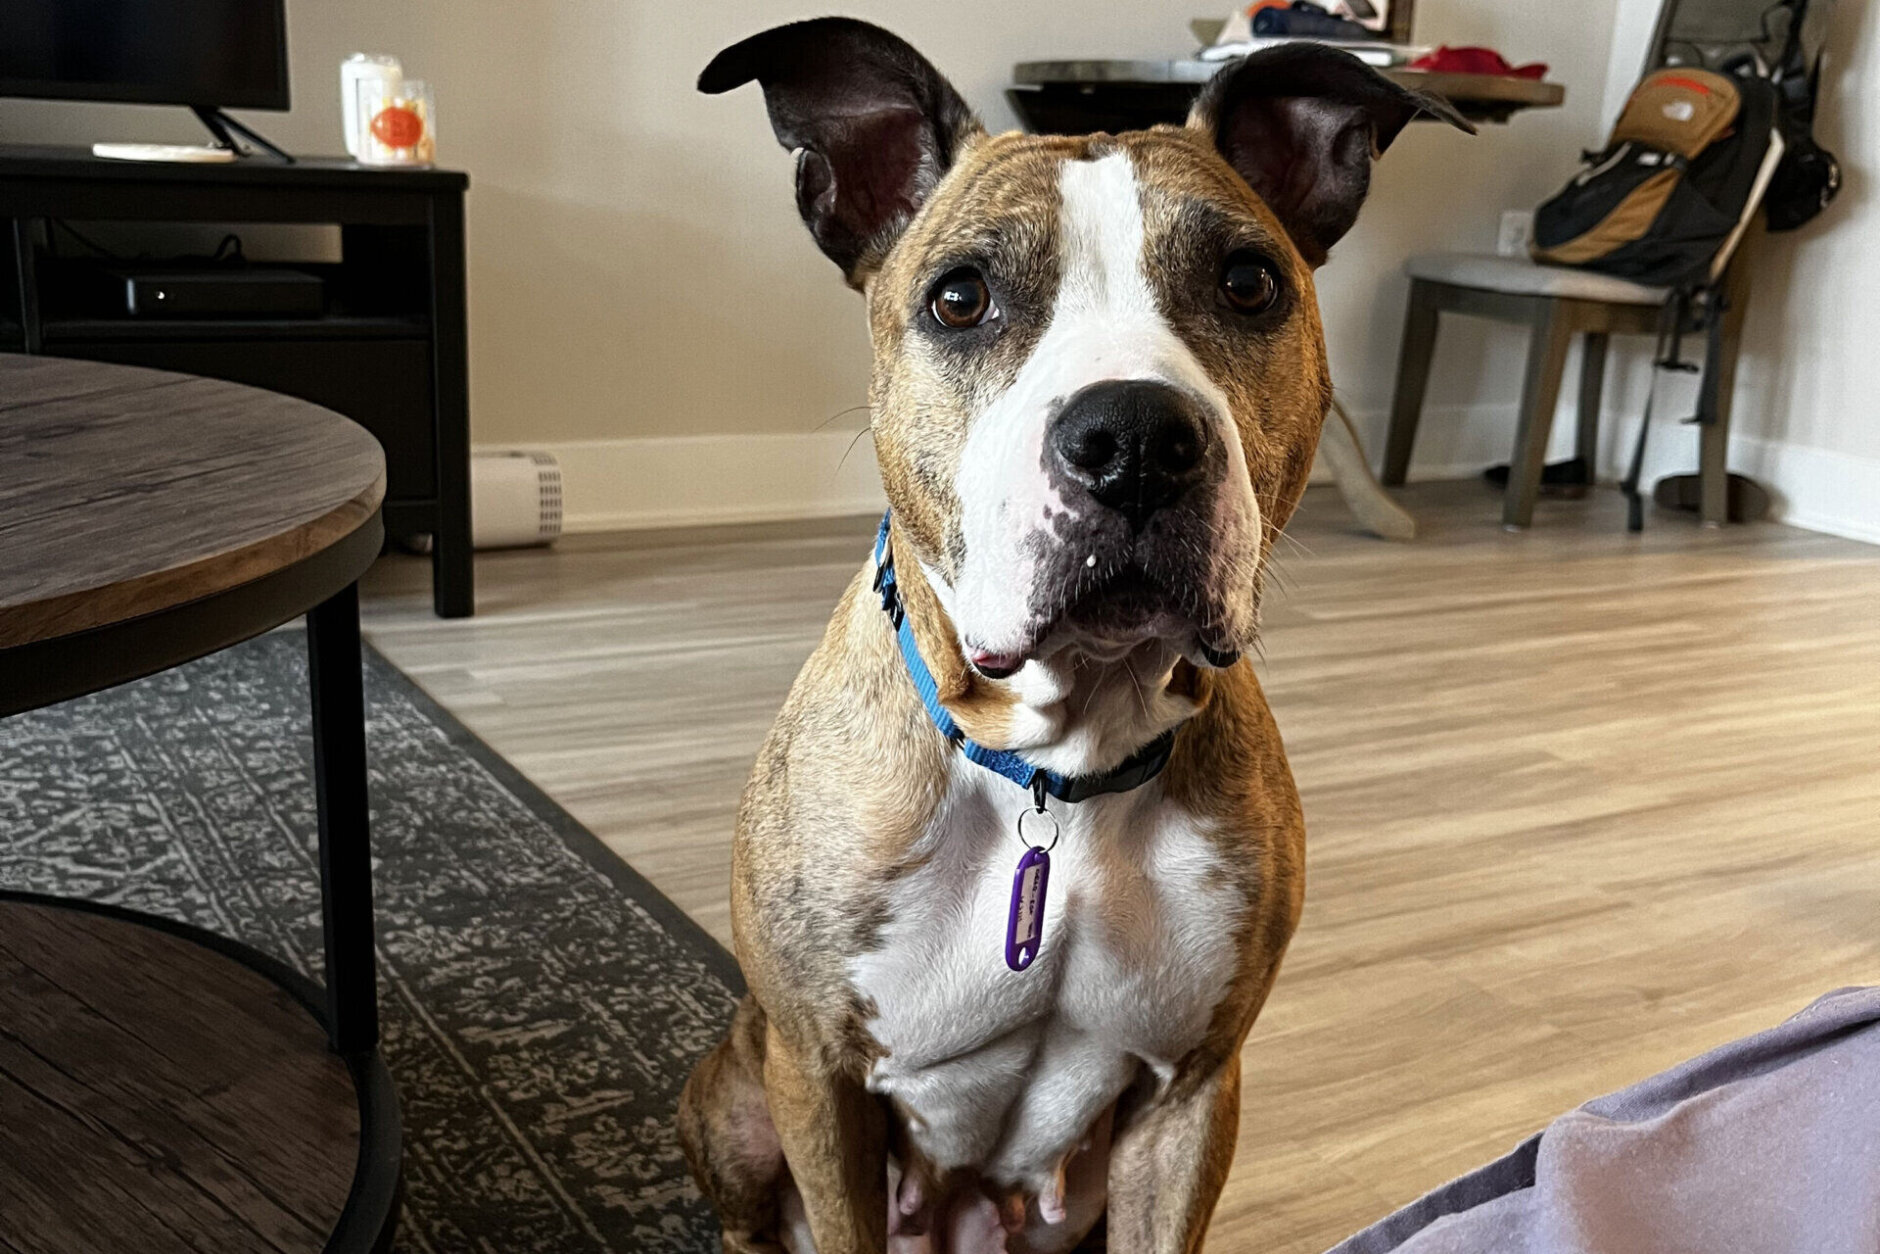 <p><strong>Laney</strong>’s foster mom was smitten by her sweet nature and good manners, so she quickly became a “foster fail.” The pup now enjoys city life in D.C.</p>
